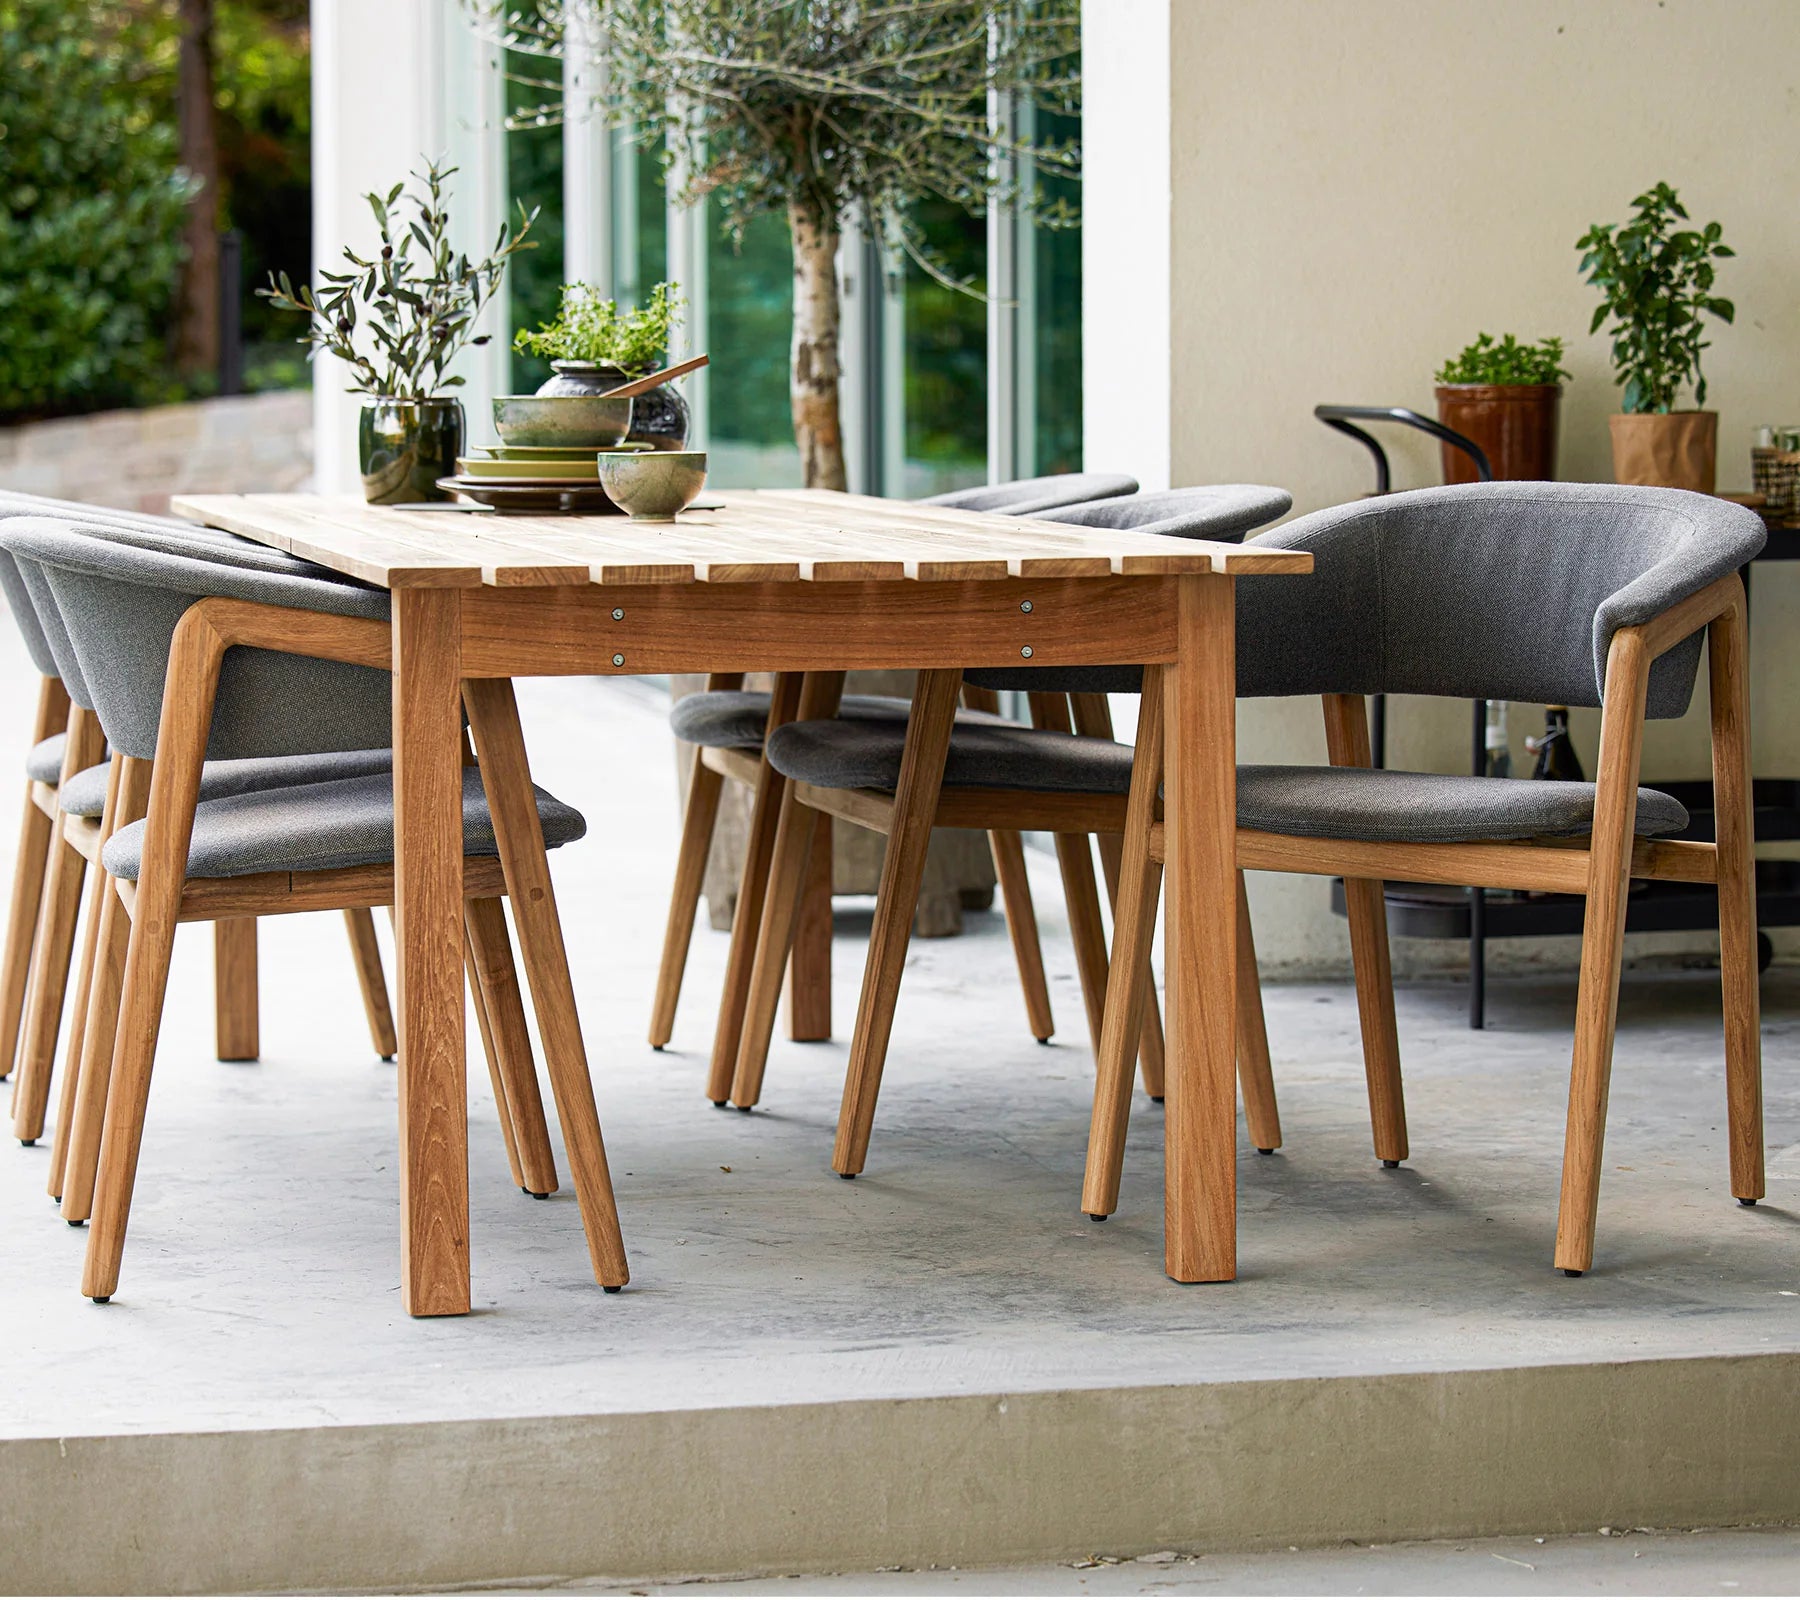 Boxhill's Luna Outdoor Dining Armchair Lifestyle image with teak dining table at patio